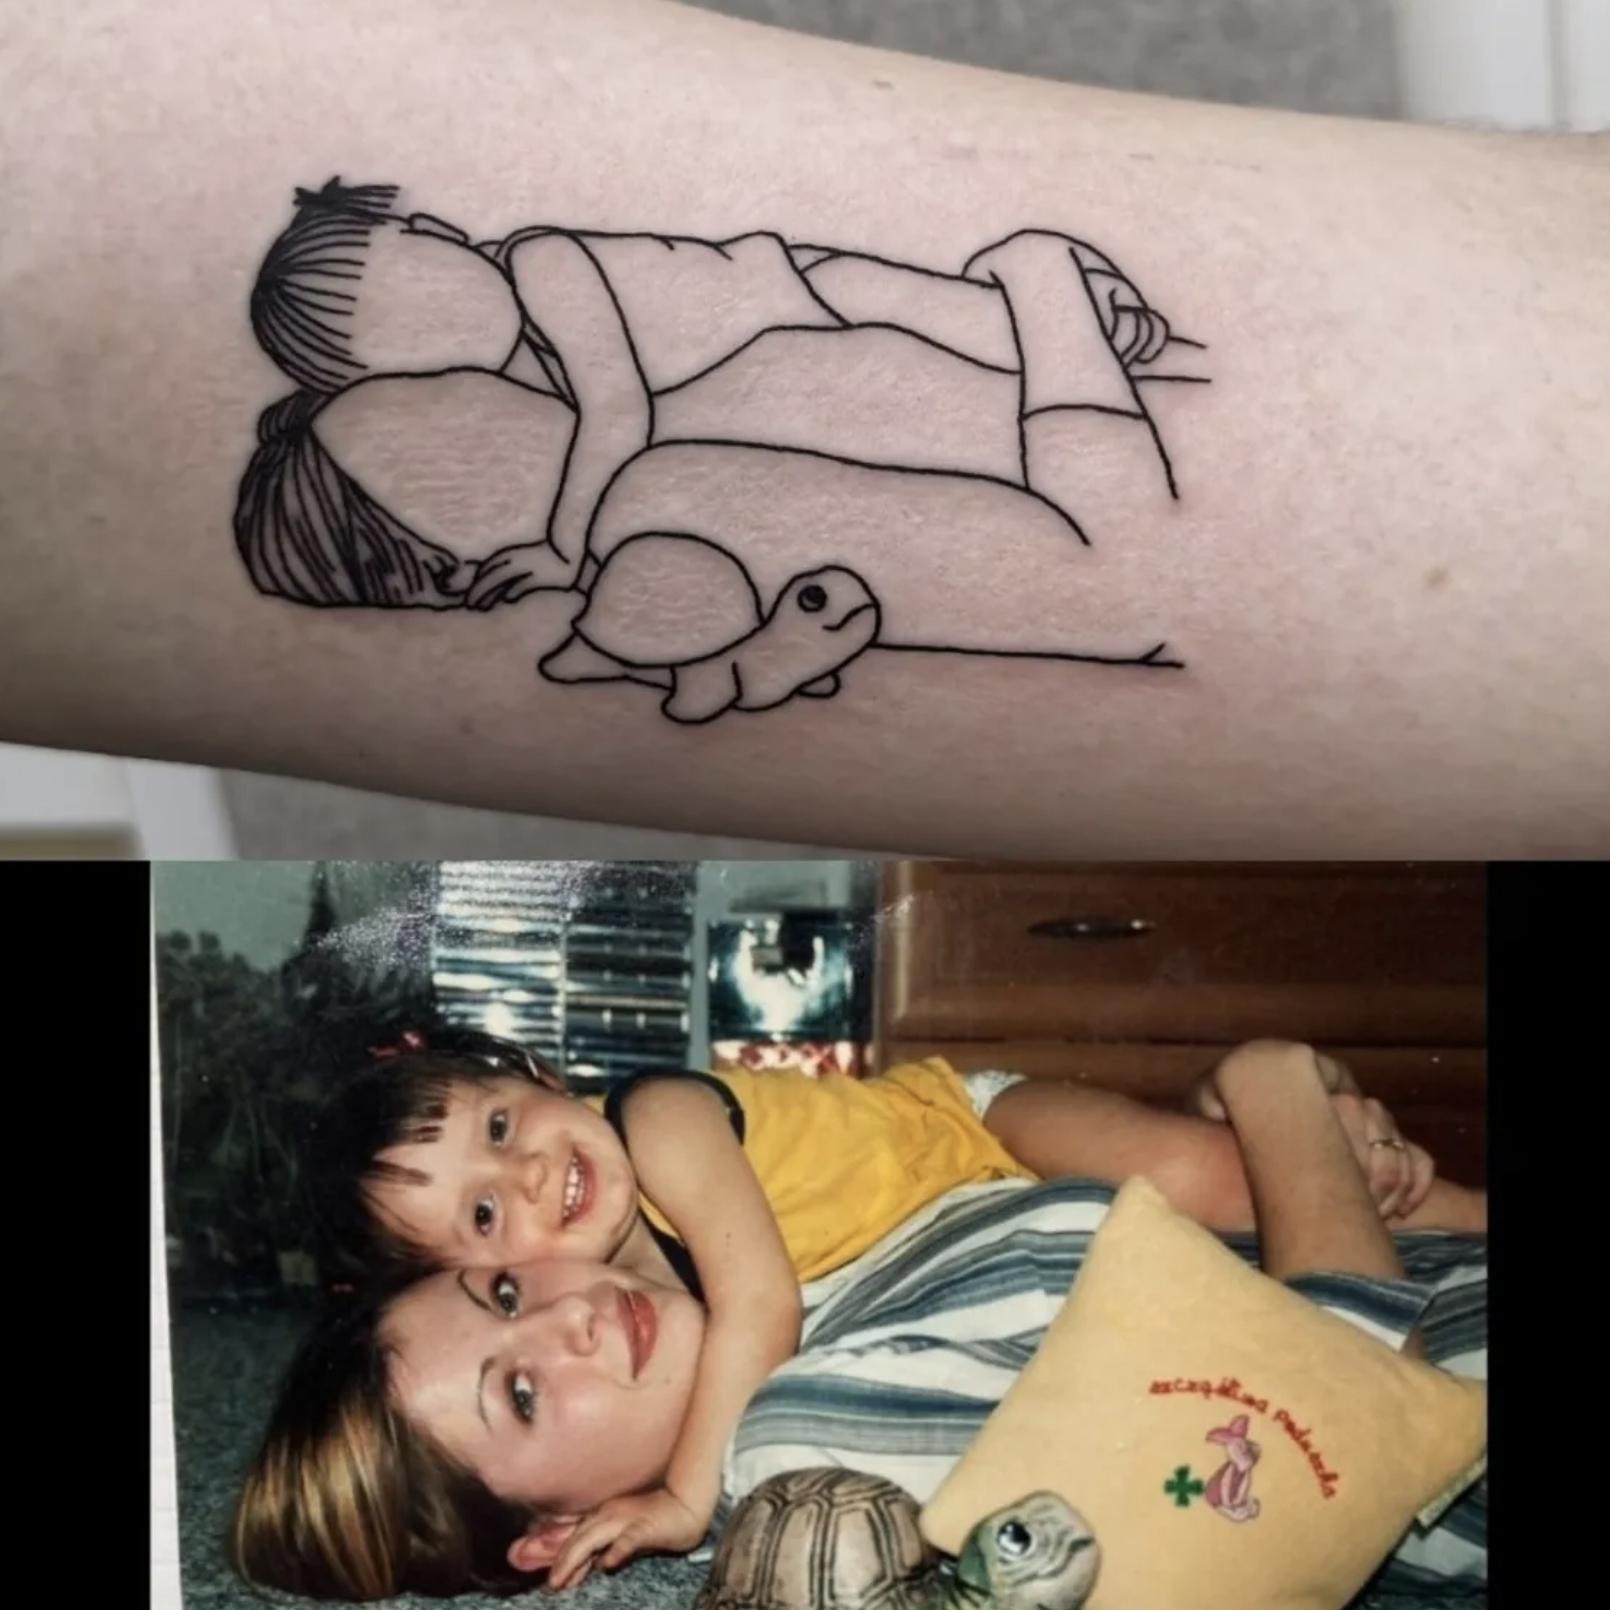 Family Tattoo Ideas That We Can't Get Enough Of | FamilyMinded